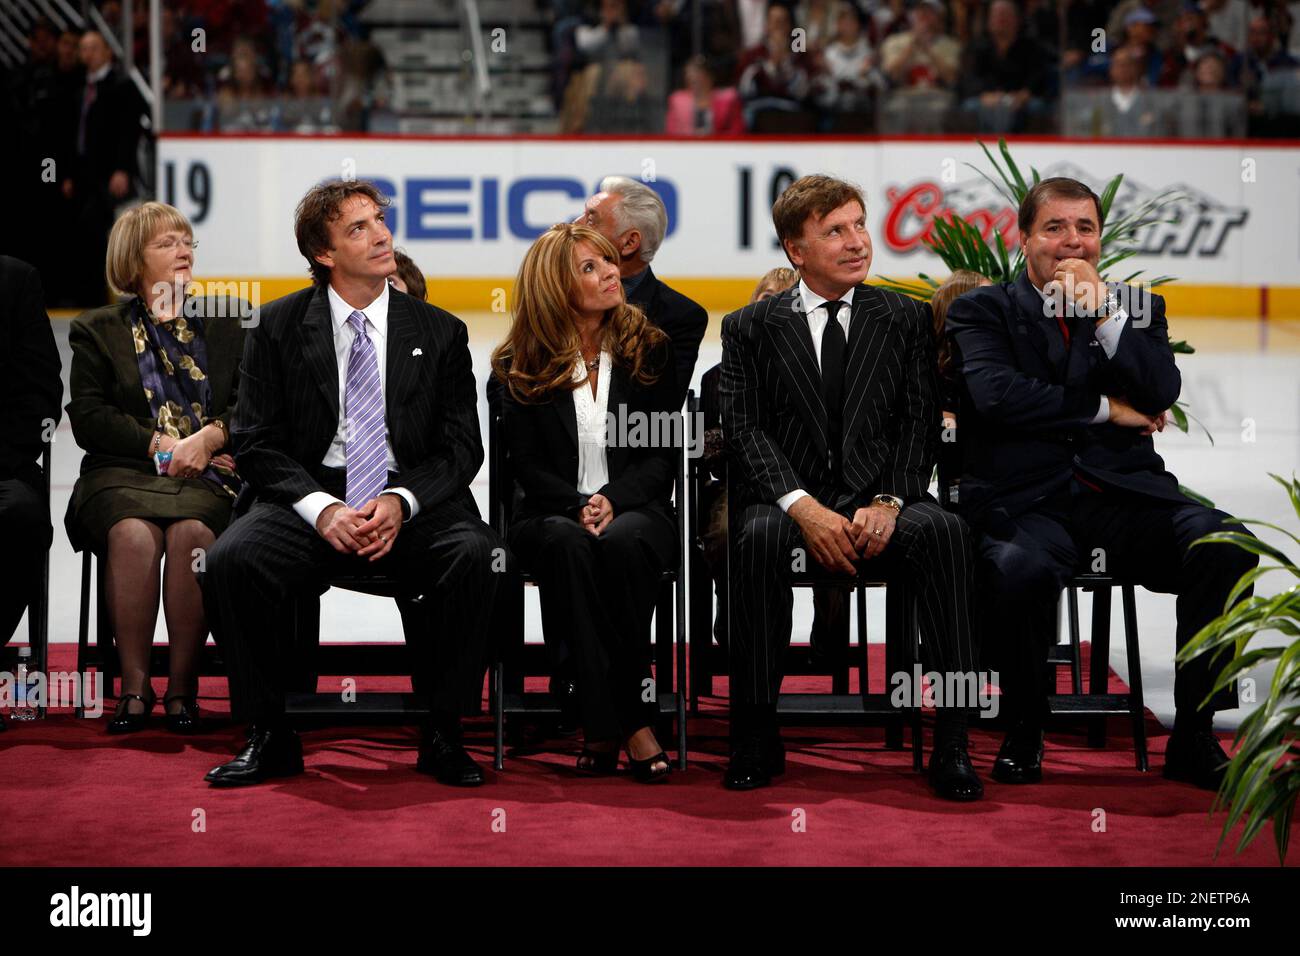 Joe Sakic, right, looks on during a ceremony to mark his